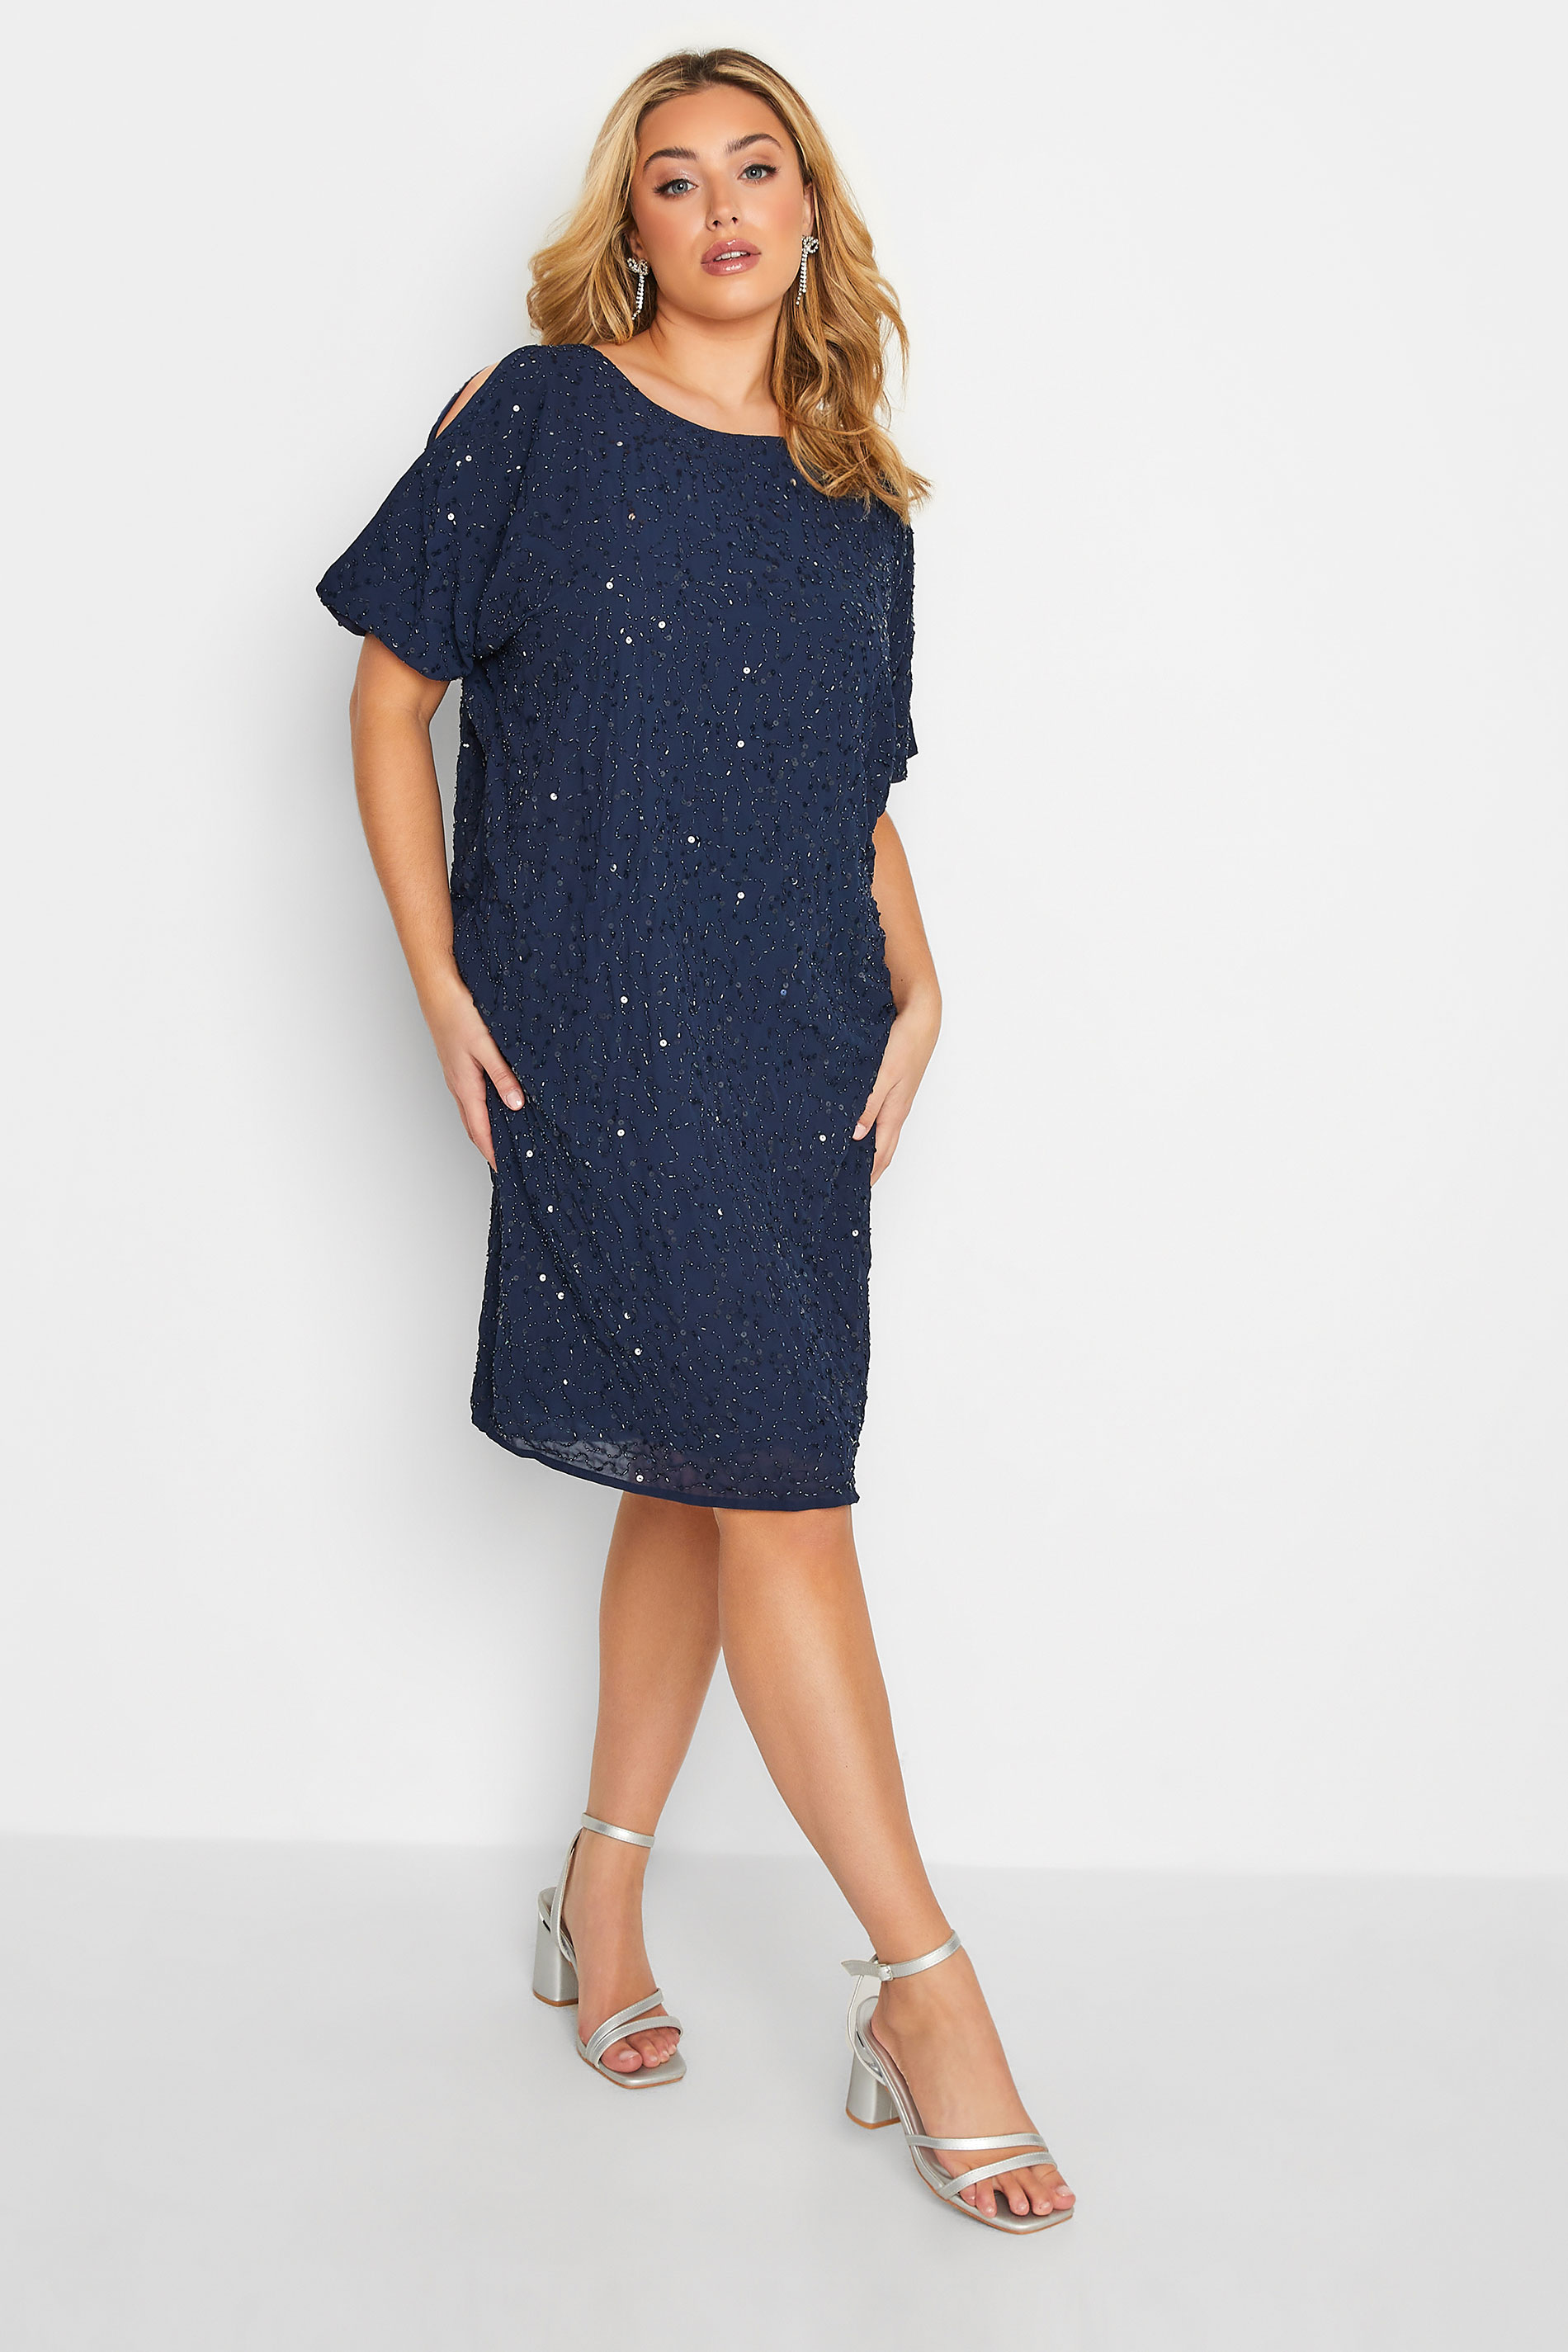 LUXE Plus Size Blue Sequin Hand Embellished Cape Dress | Yours Clothing